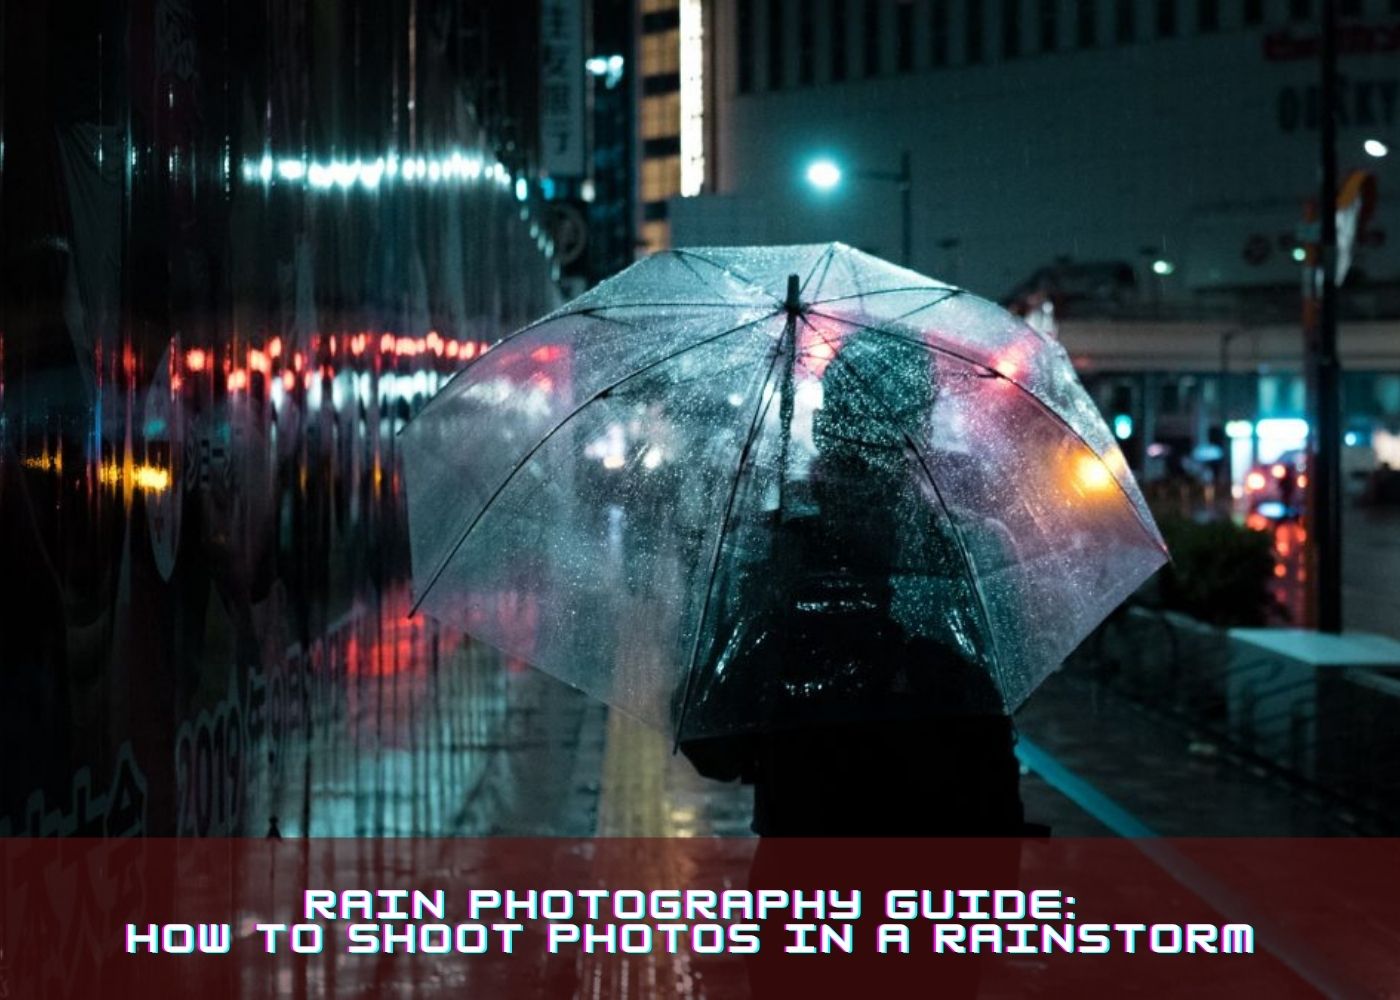 Rain Photography Guide: How to Shoot Photos in a Rainstorm 